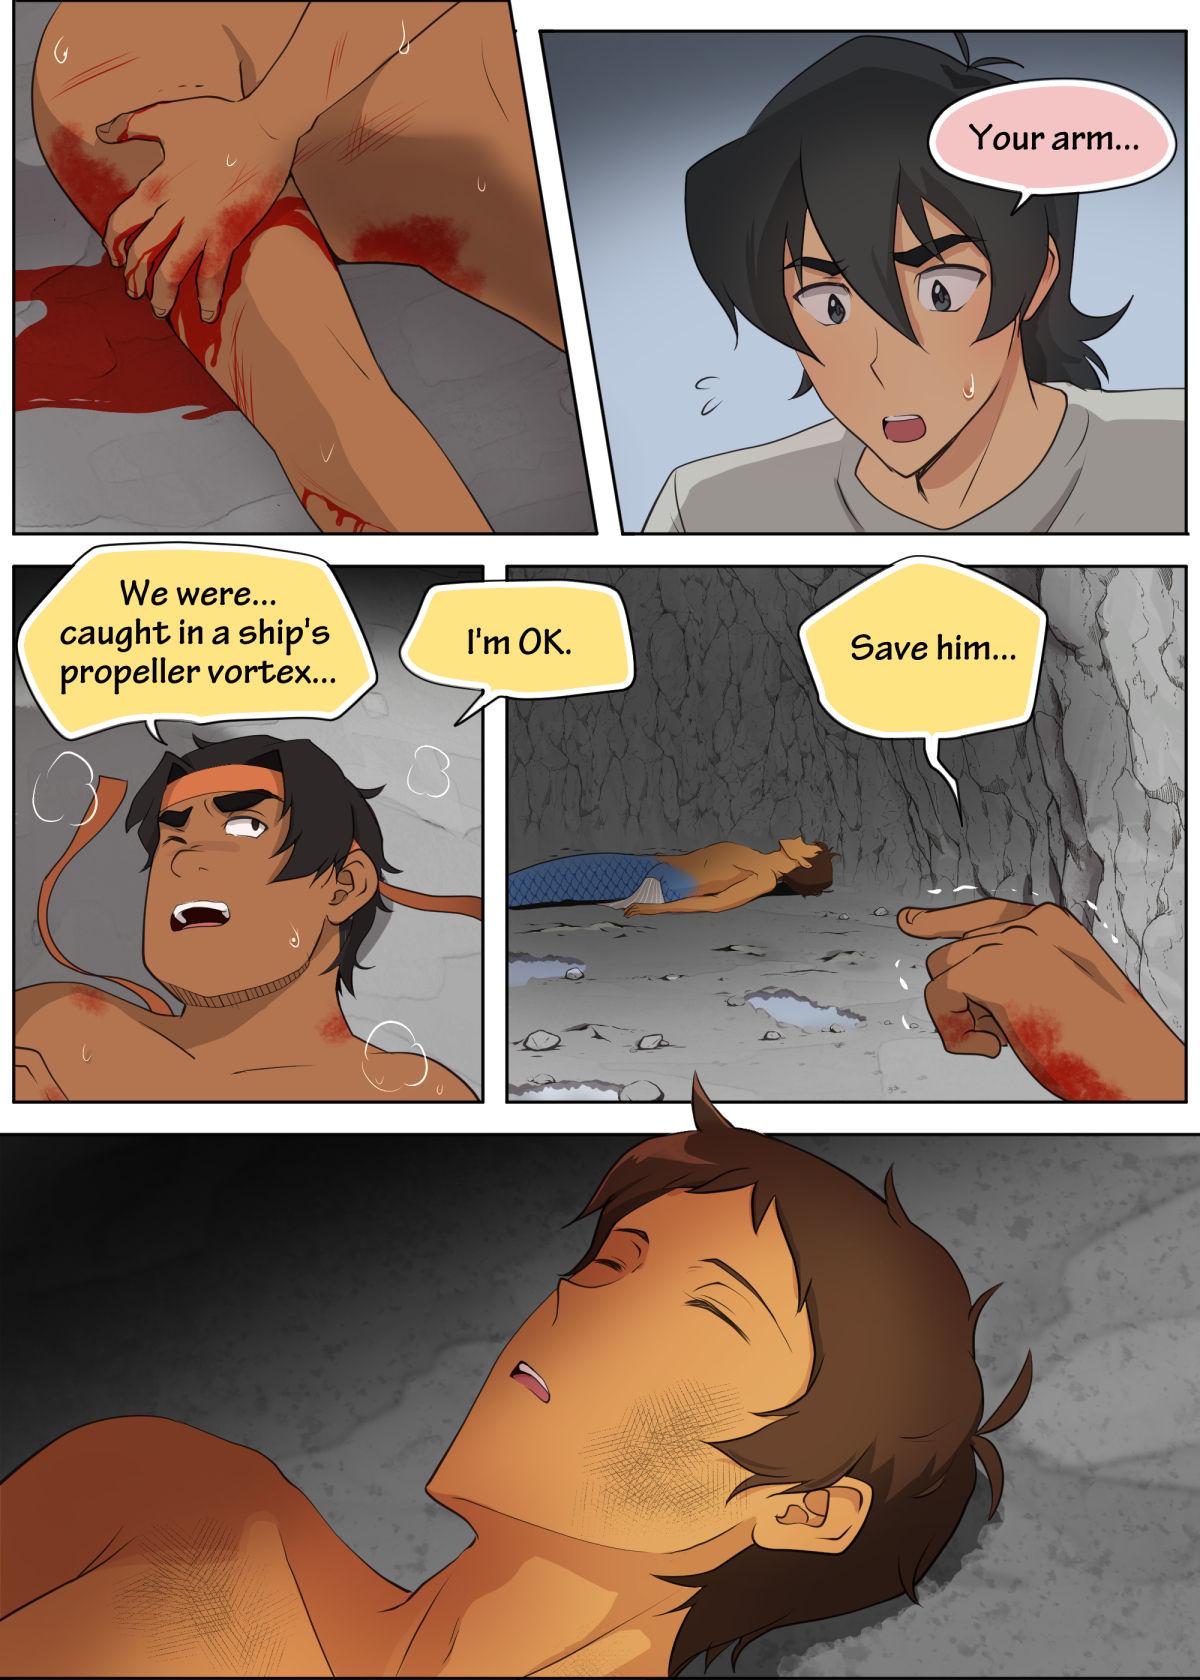 Exhibitionist As Wet As a Merman - Voltron Hardcore - Page 9